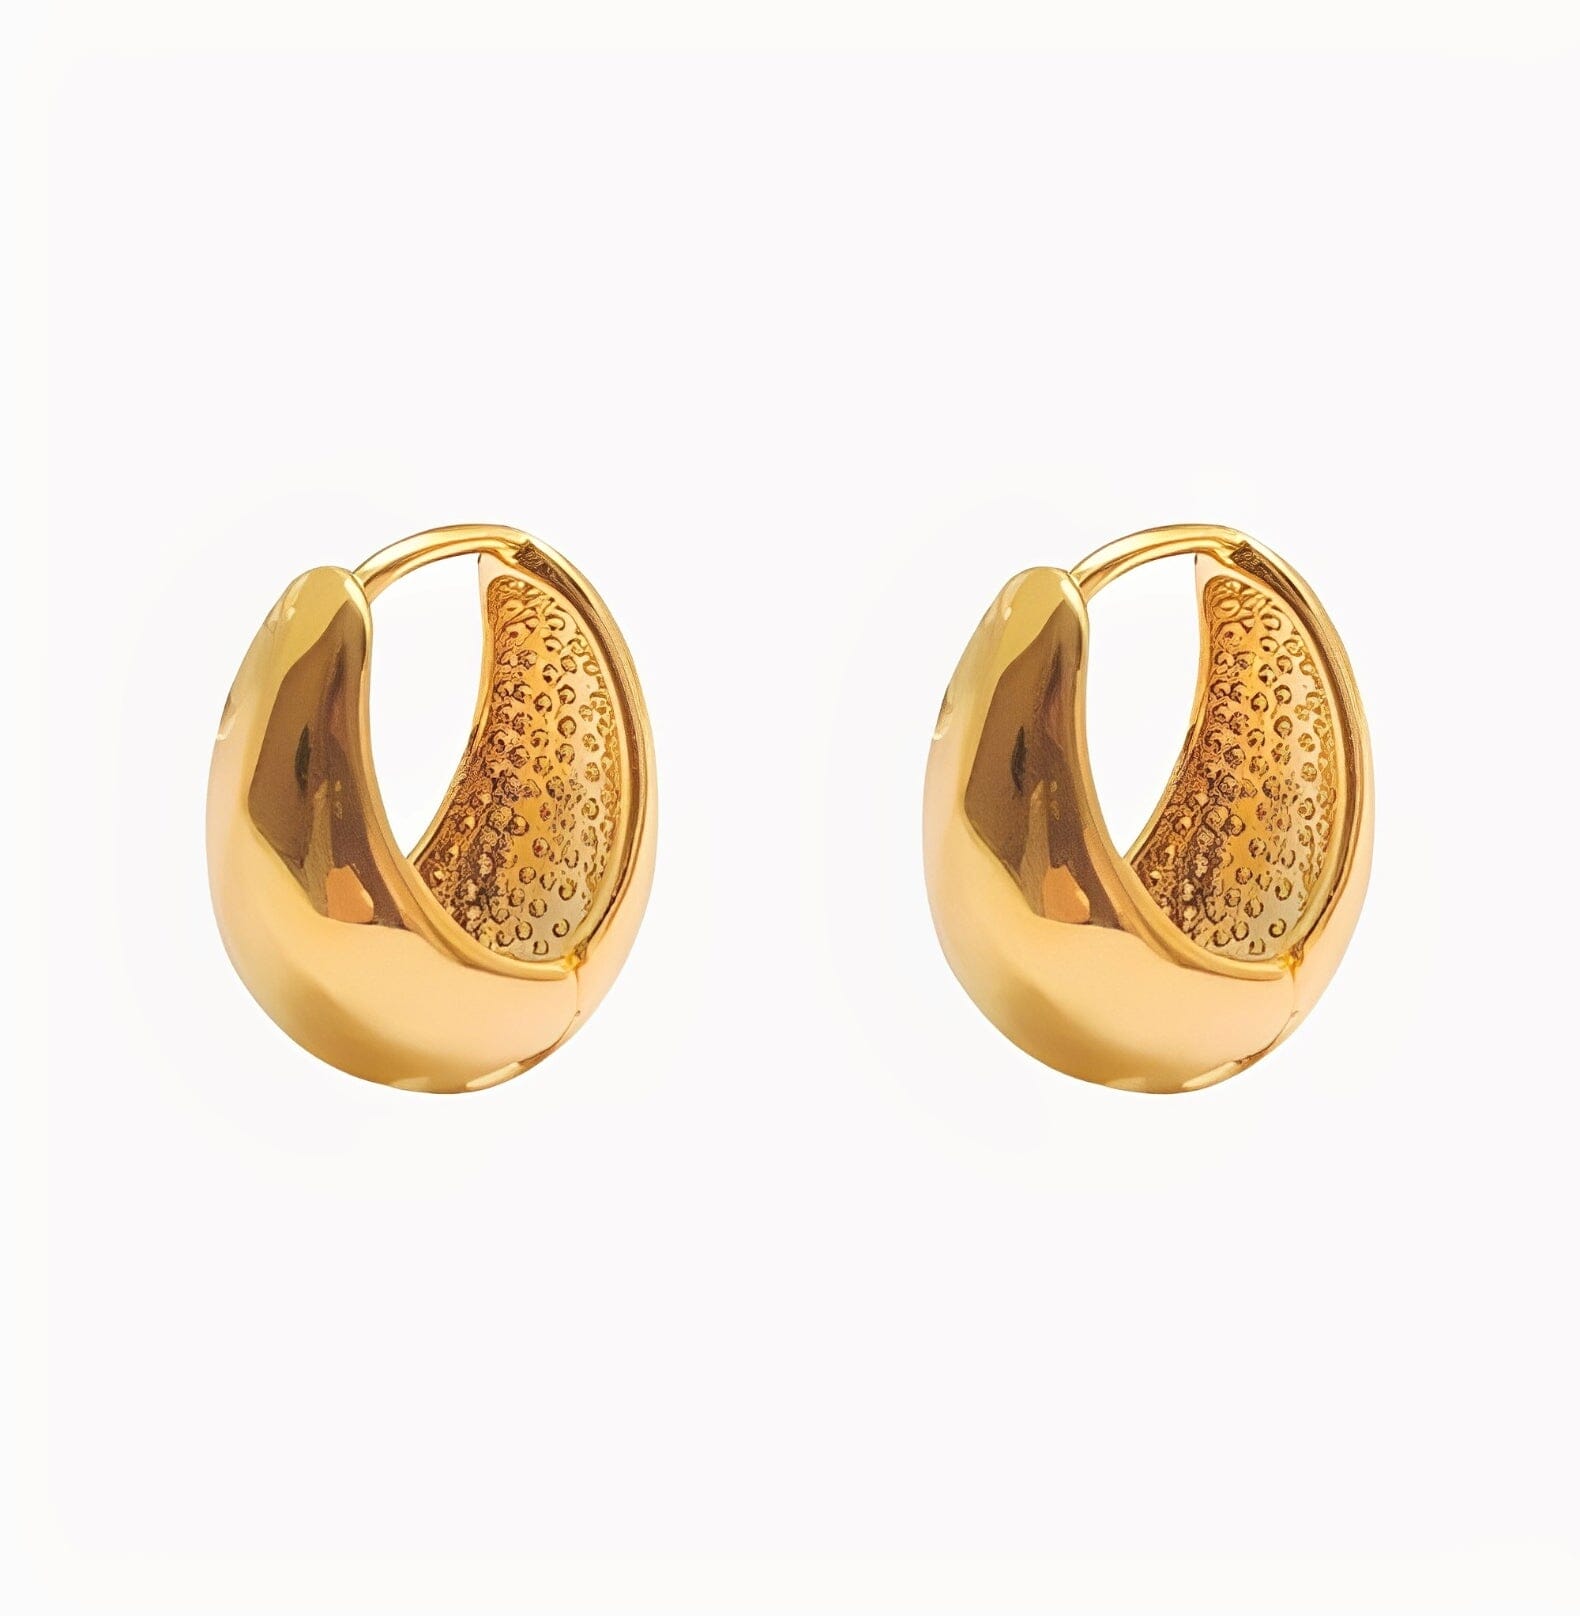 SYDNEY HOOPS EARRING earing Yubama Jewelry Online Store - The Elegant Designs of Gold and Silver ! 